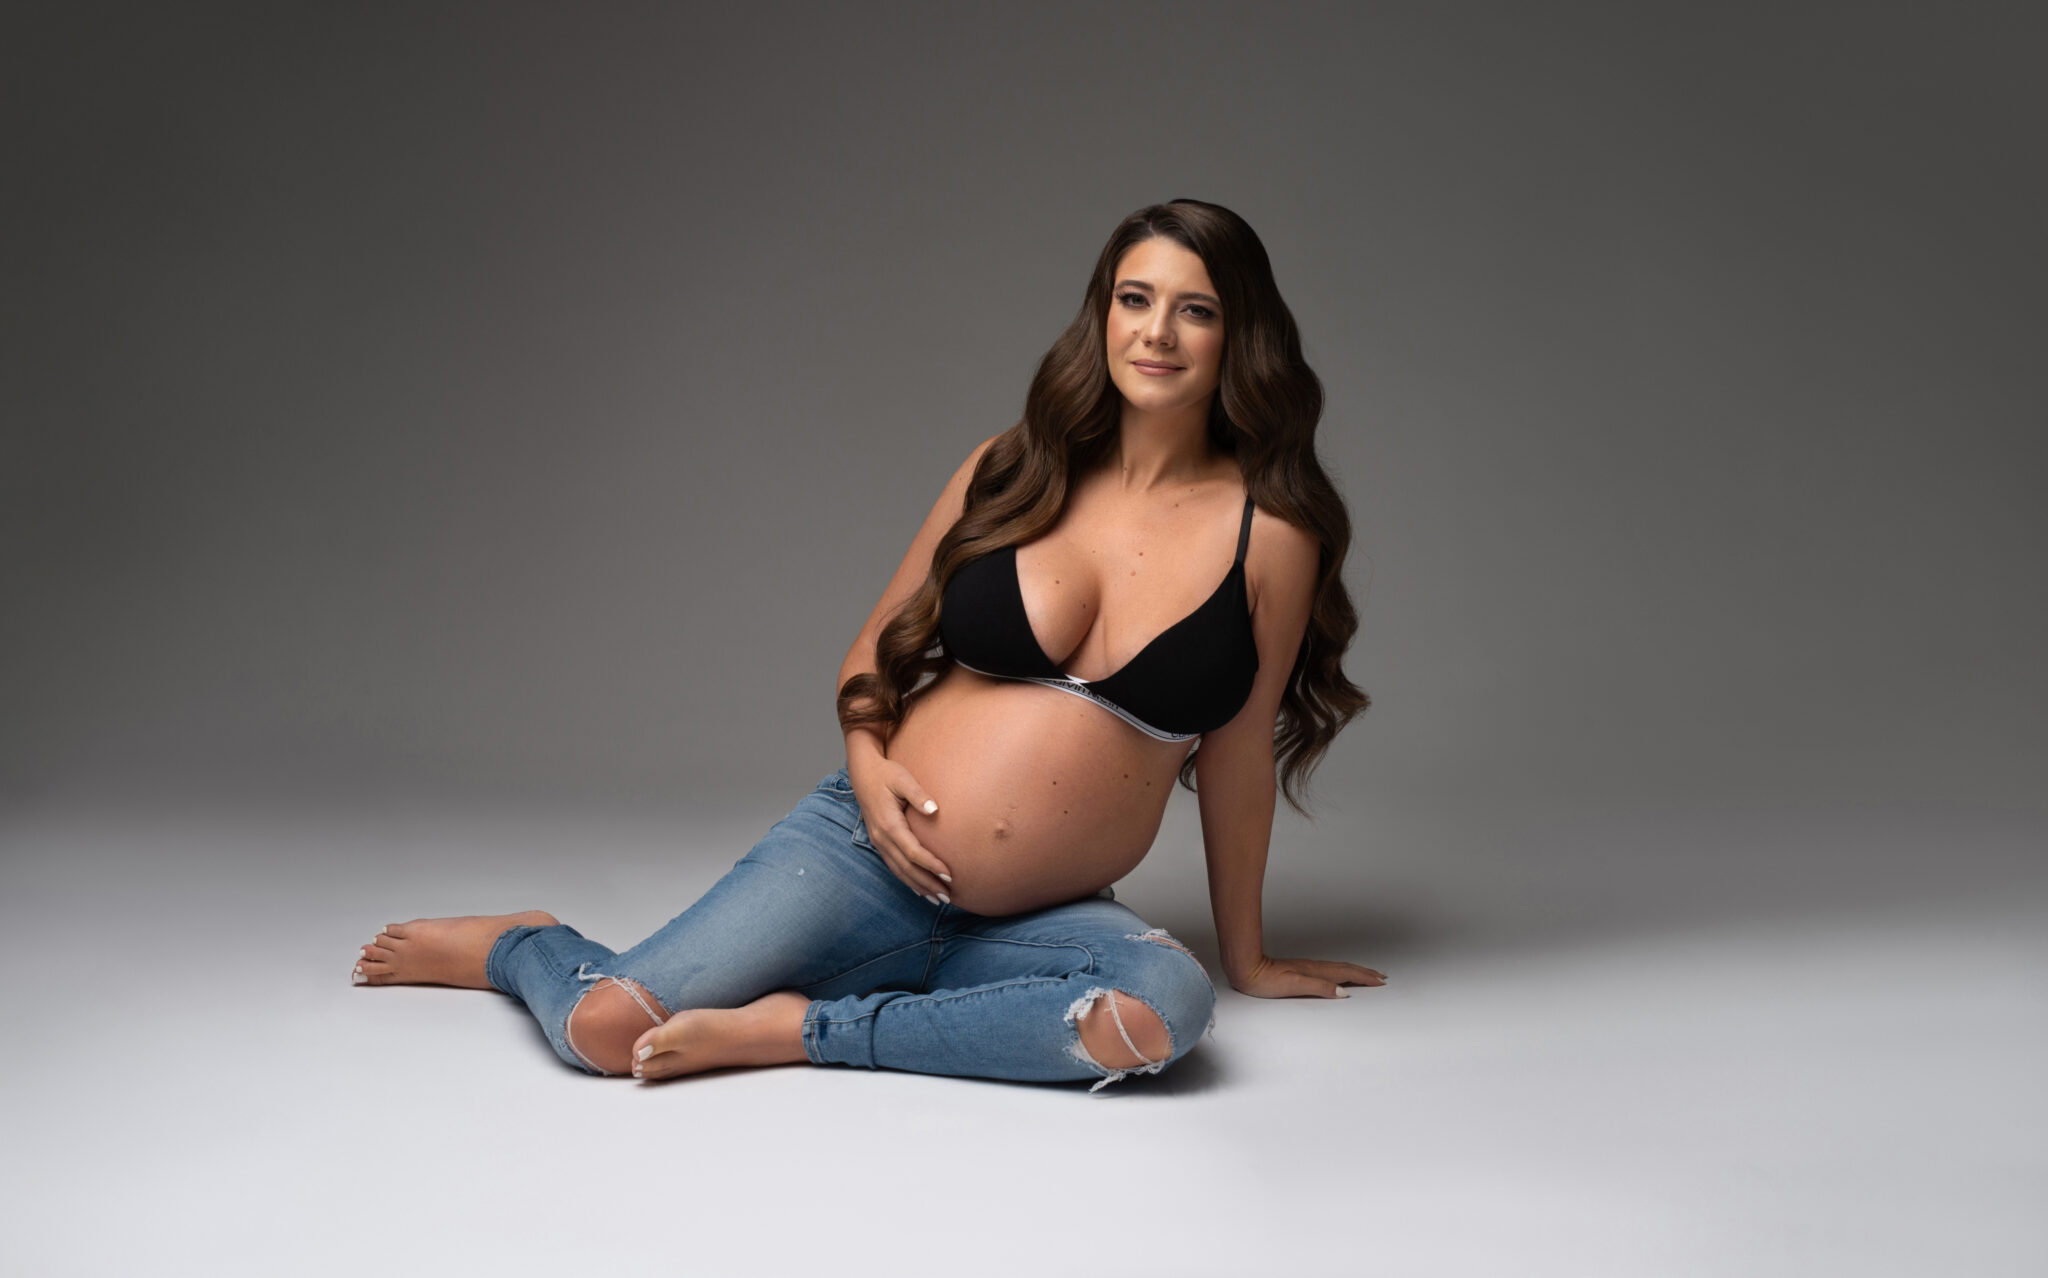 Maternity portrait of woman in jeans on the floor